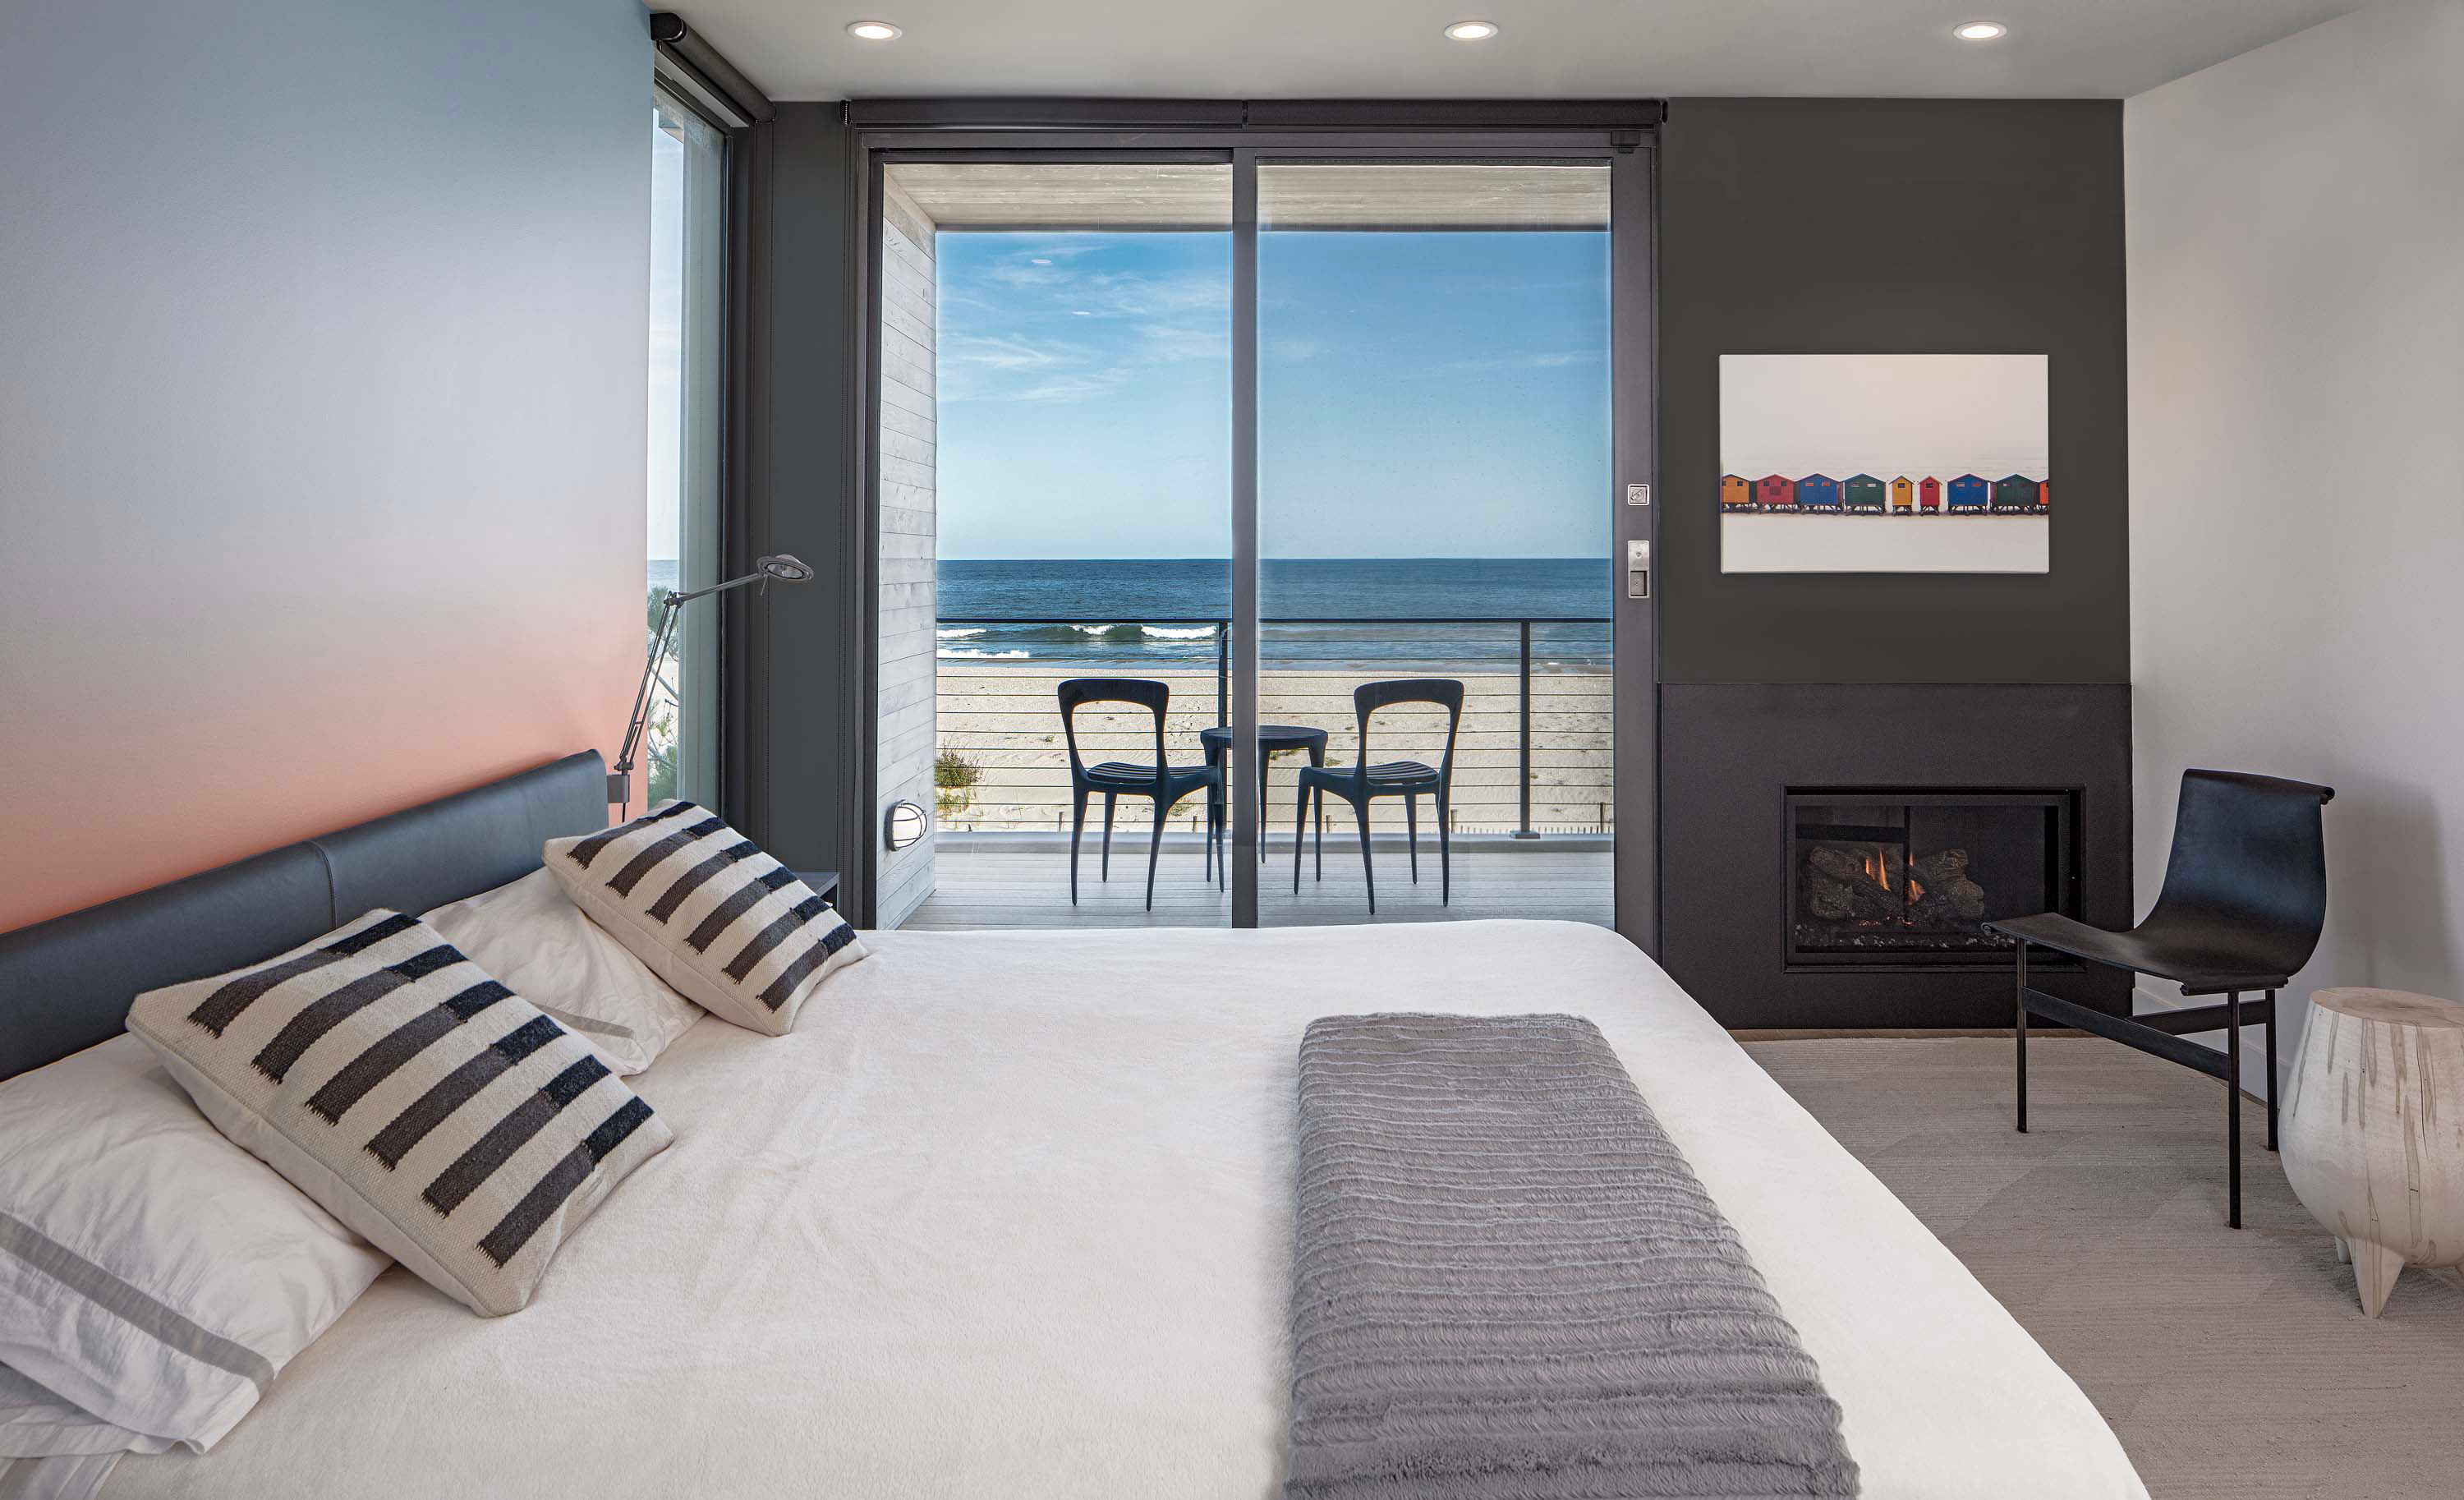 Interior photo of the Beach Haven Residence by Specht Novak Architects. Shot by Taggart Sorenson featuring a bedroom with large glass sliding doors that open to a balcony and view of the beach.